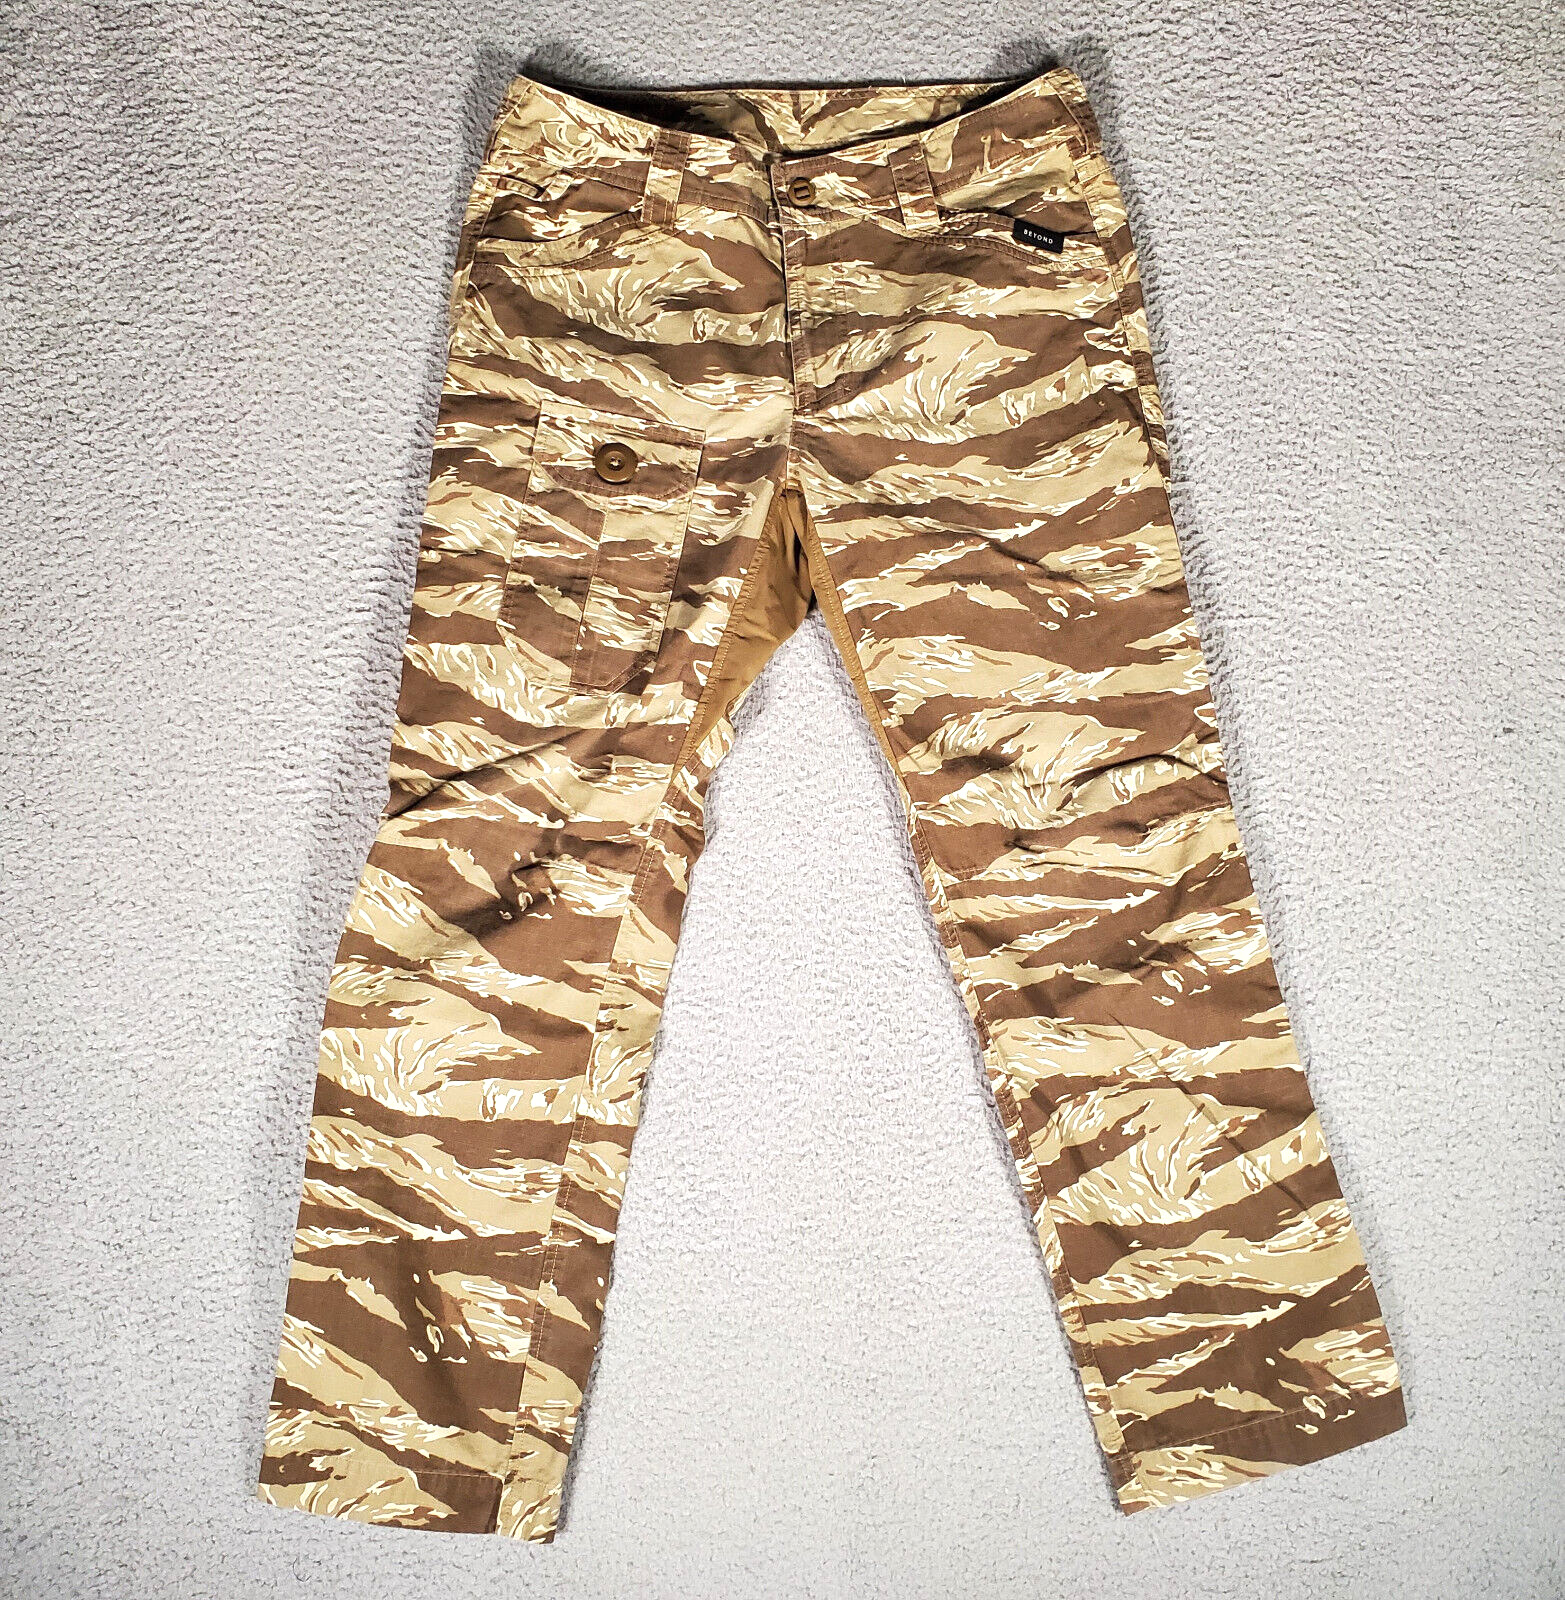 Beyond Clothing Combat Pants 32x30 Camo Brown Ripstop Canvas Stretch Lightweight